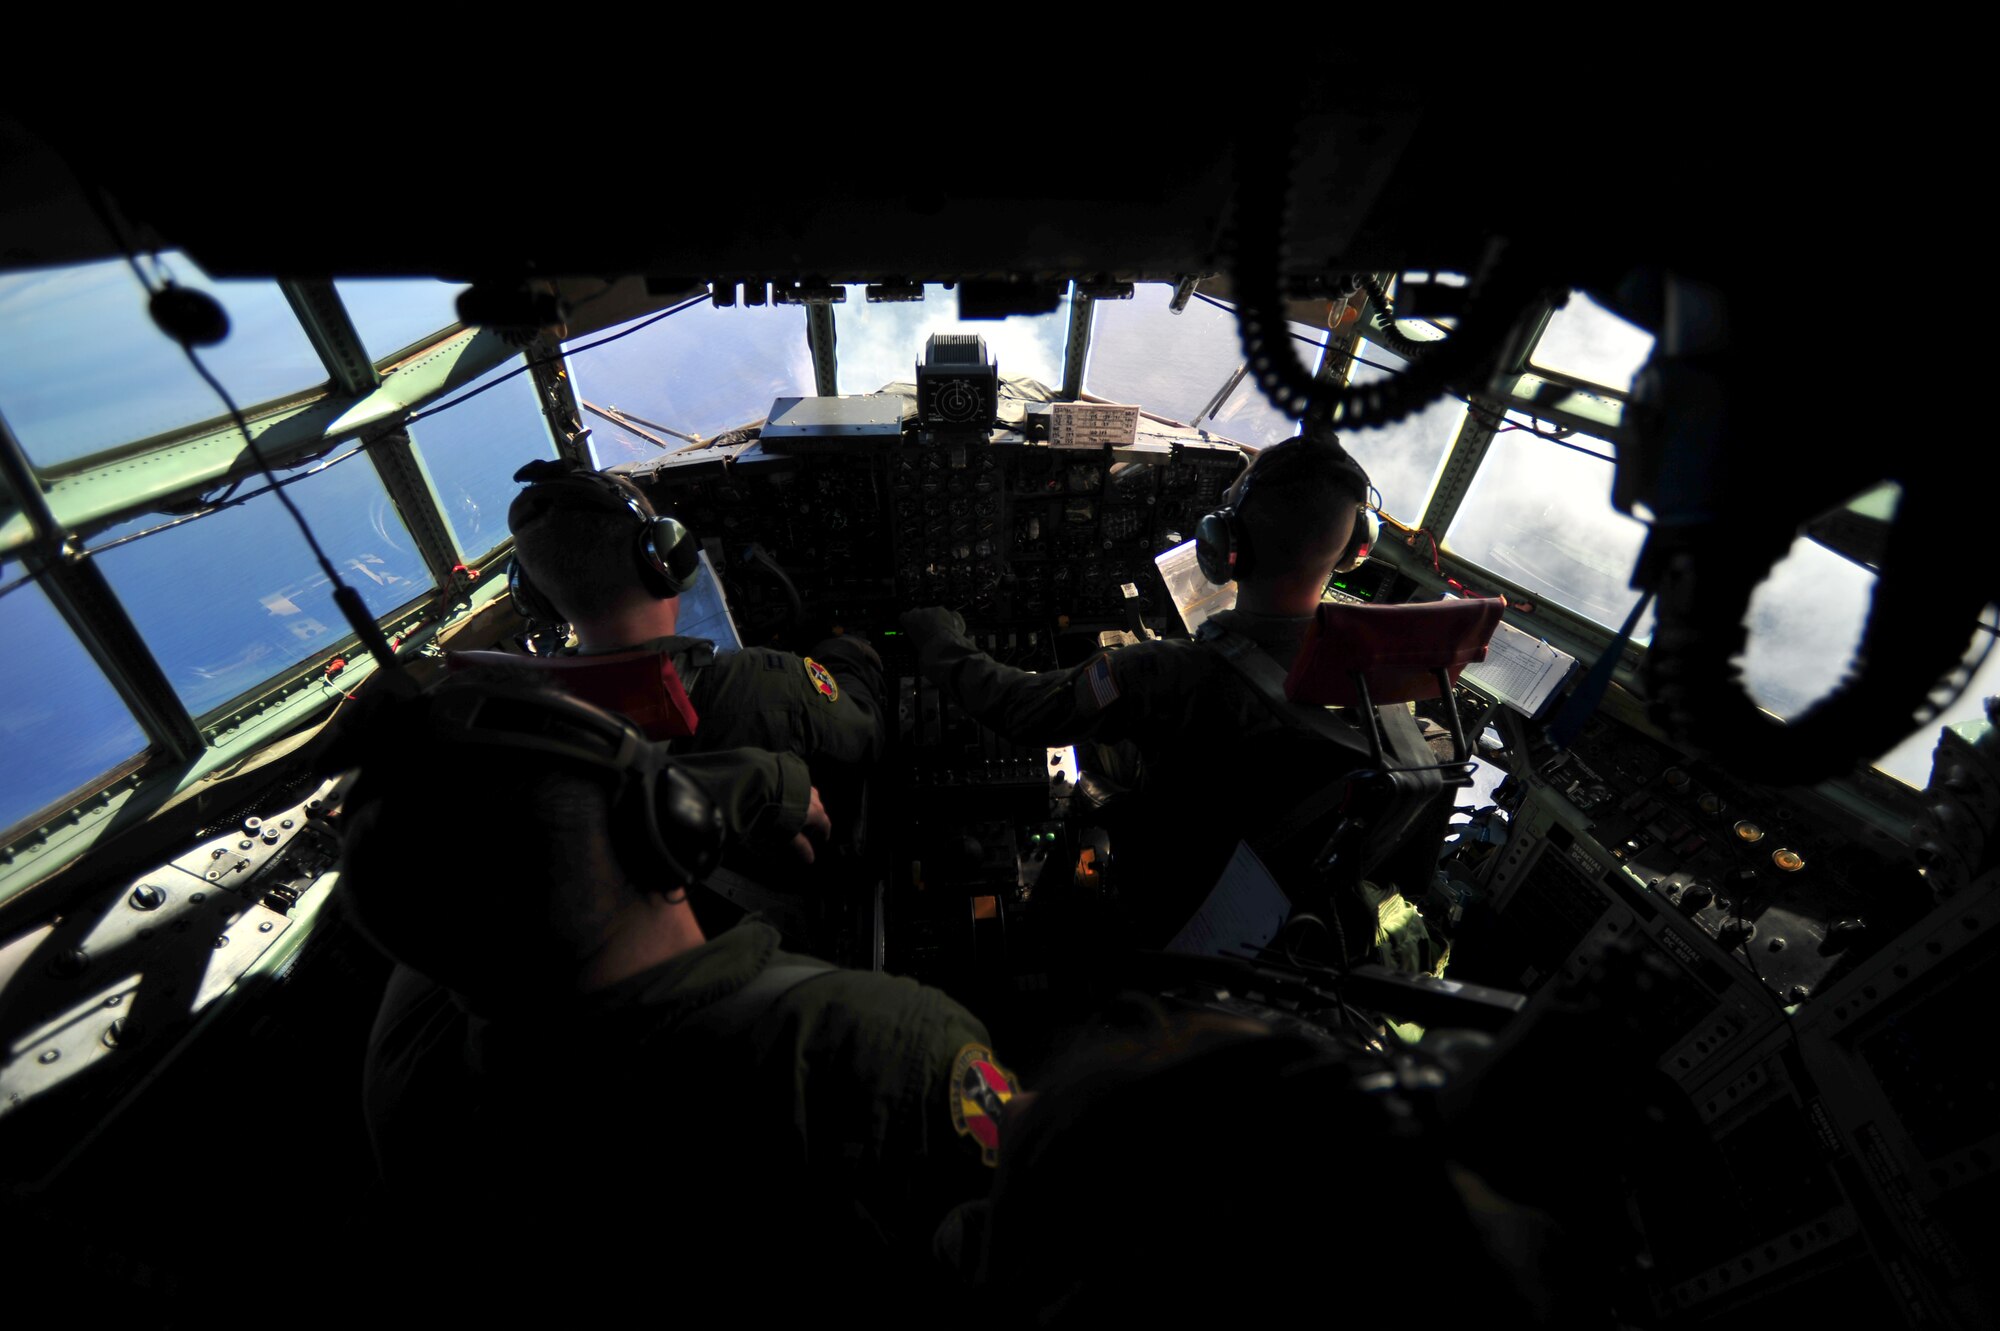 A U.S. Air Force C-130H crew from the 36th Airlift Squadron, Yokota, Japan, conducts a humanitarian aid and disaster relief mission near Guam in support of Cope North 13, Feb. 6, 2013. Cope North is a multilateral aerial exercise, held once or twice yearly, designed to increase the combat readiness and interoperability of the U.S. Air Force, Japan Air Self-Defense Force, Royal Australian Air Force and other Pacific partner nations. (U.S. Air Force photo by Senior Airman Matthew Bruch/Released)
